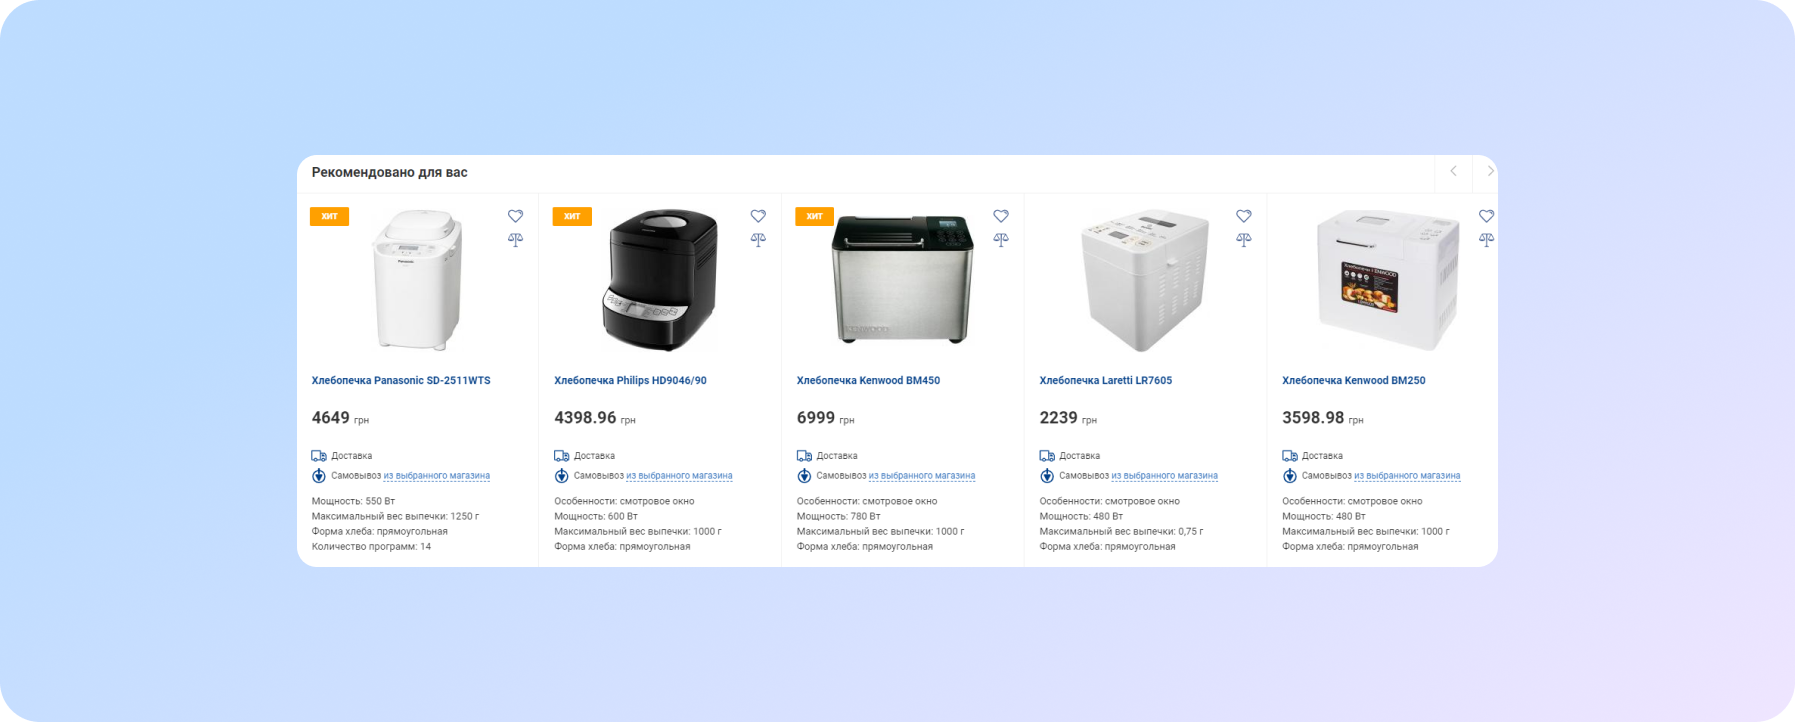 Option to display products on the site